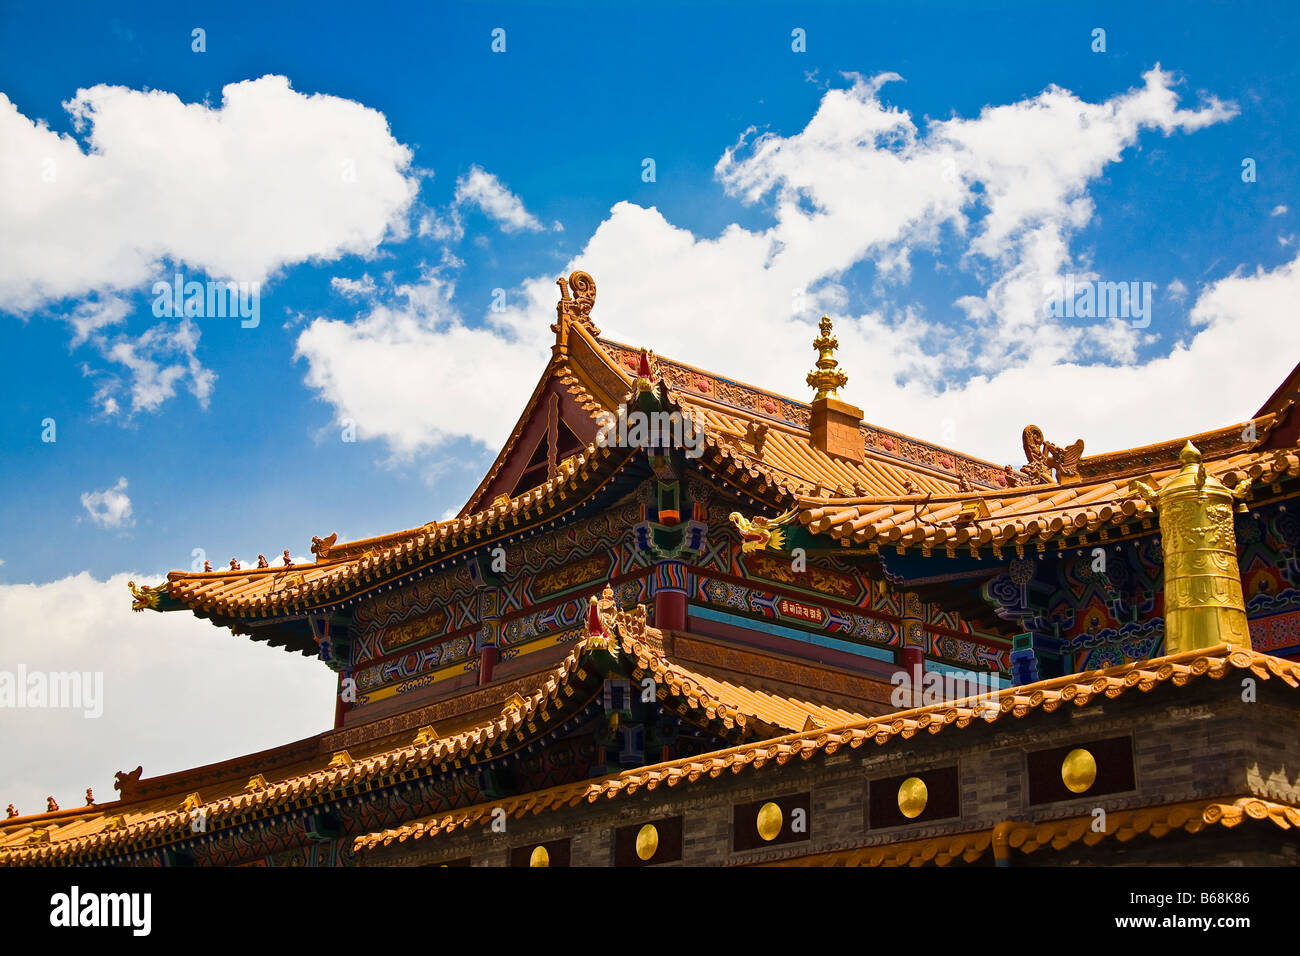 Low angle view of a temple, Temple Da Zhao, Hohhot, Inner Mongolia, China Banque D'Images